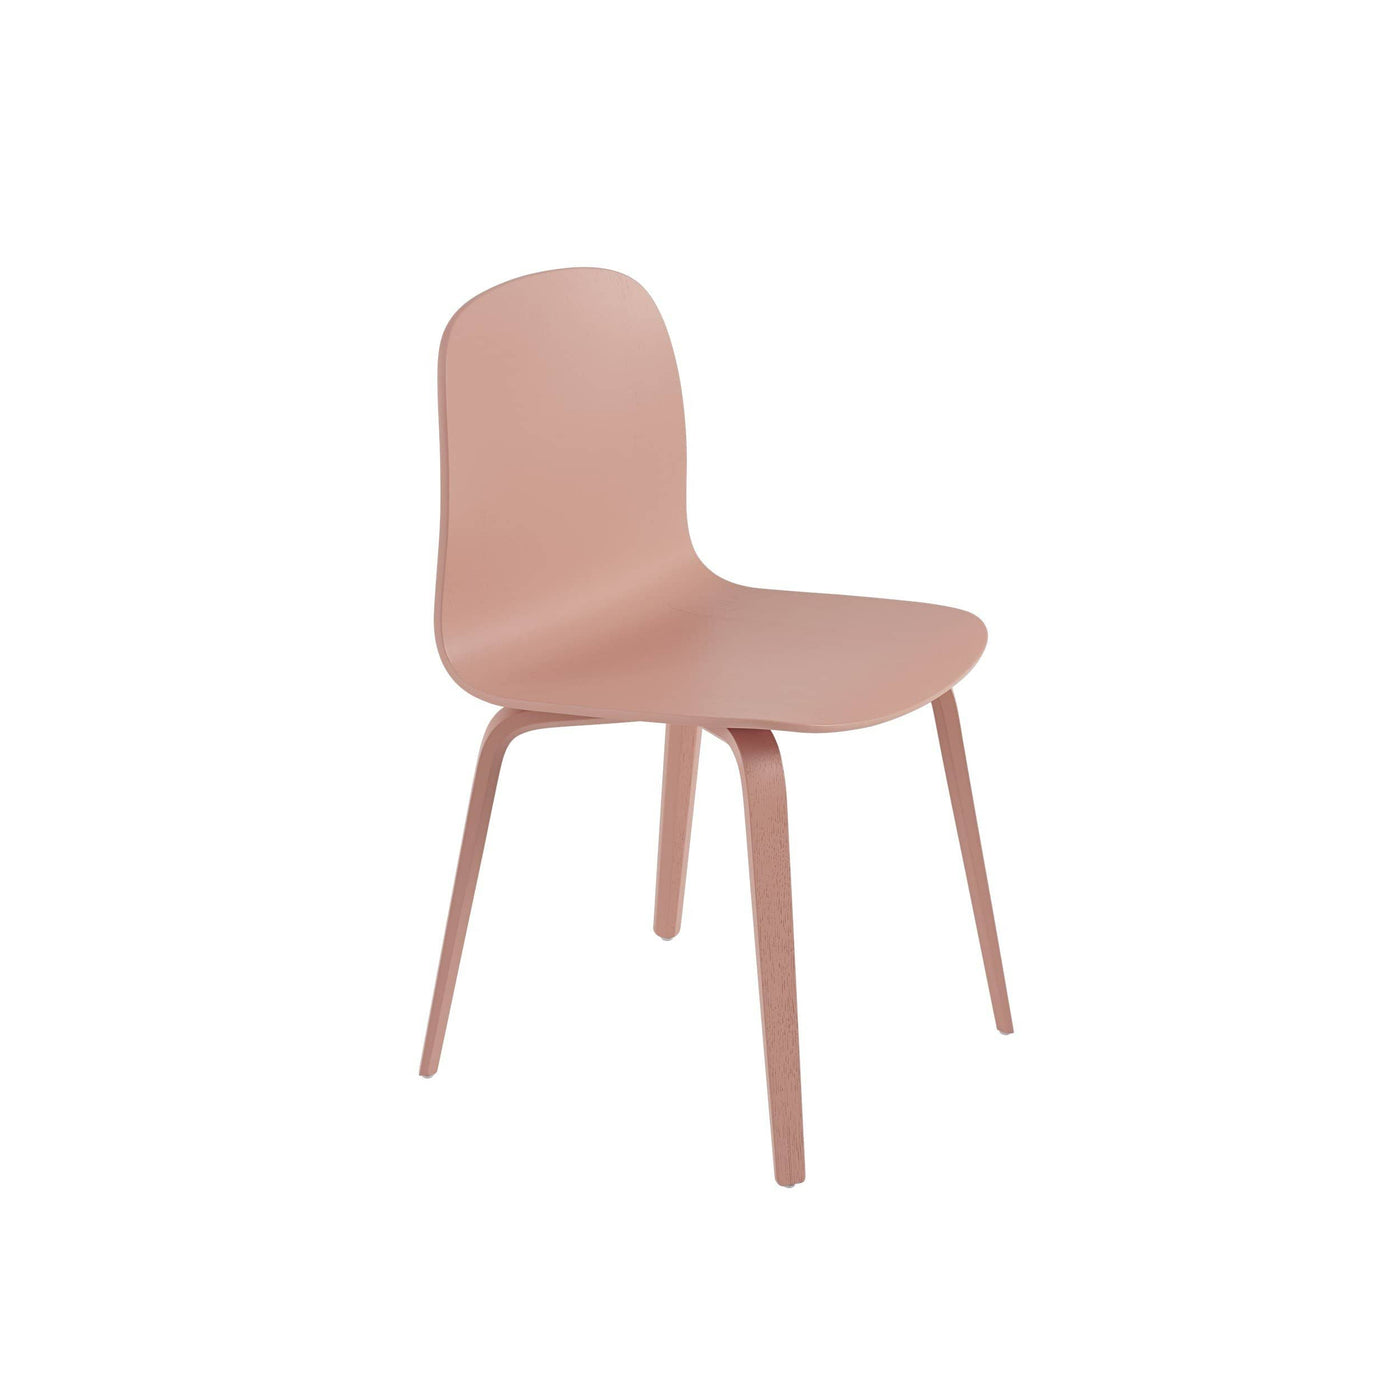 Muuto Visu chair wood base in tan rose. A modern dining chair available to buy from someday designs . #colour_tan-rose